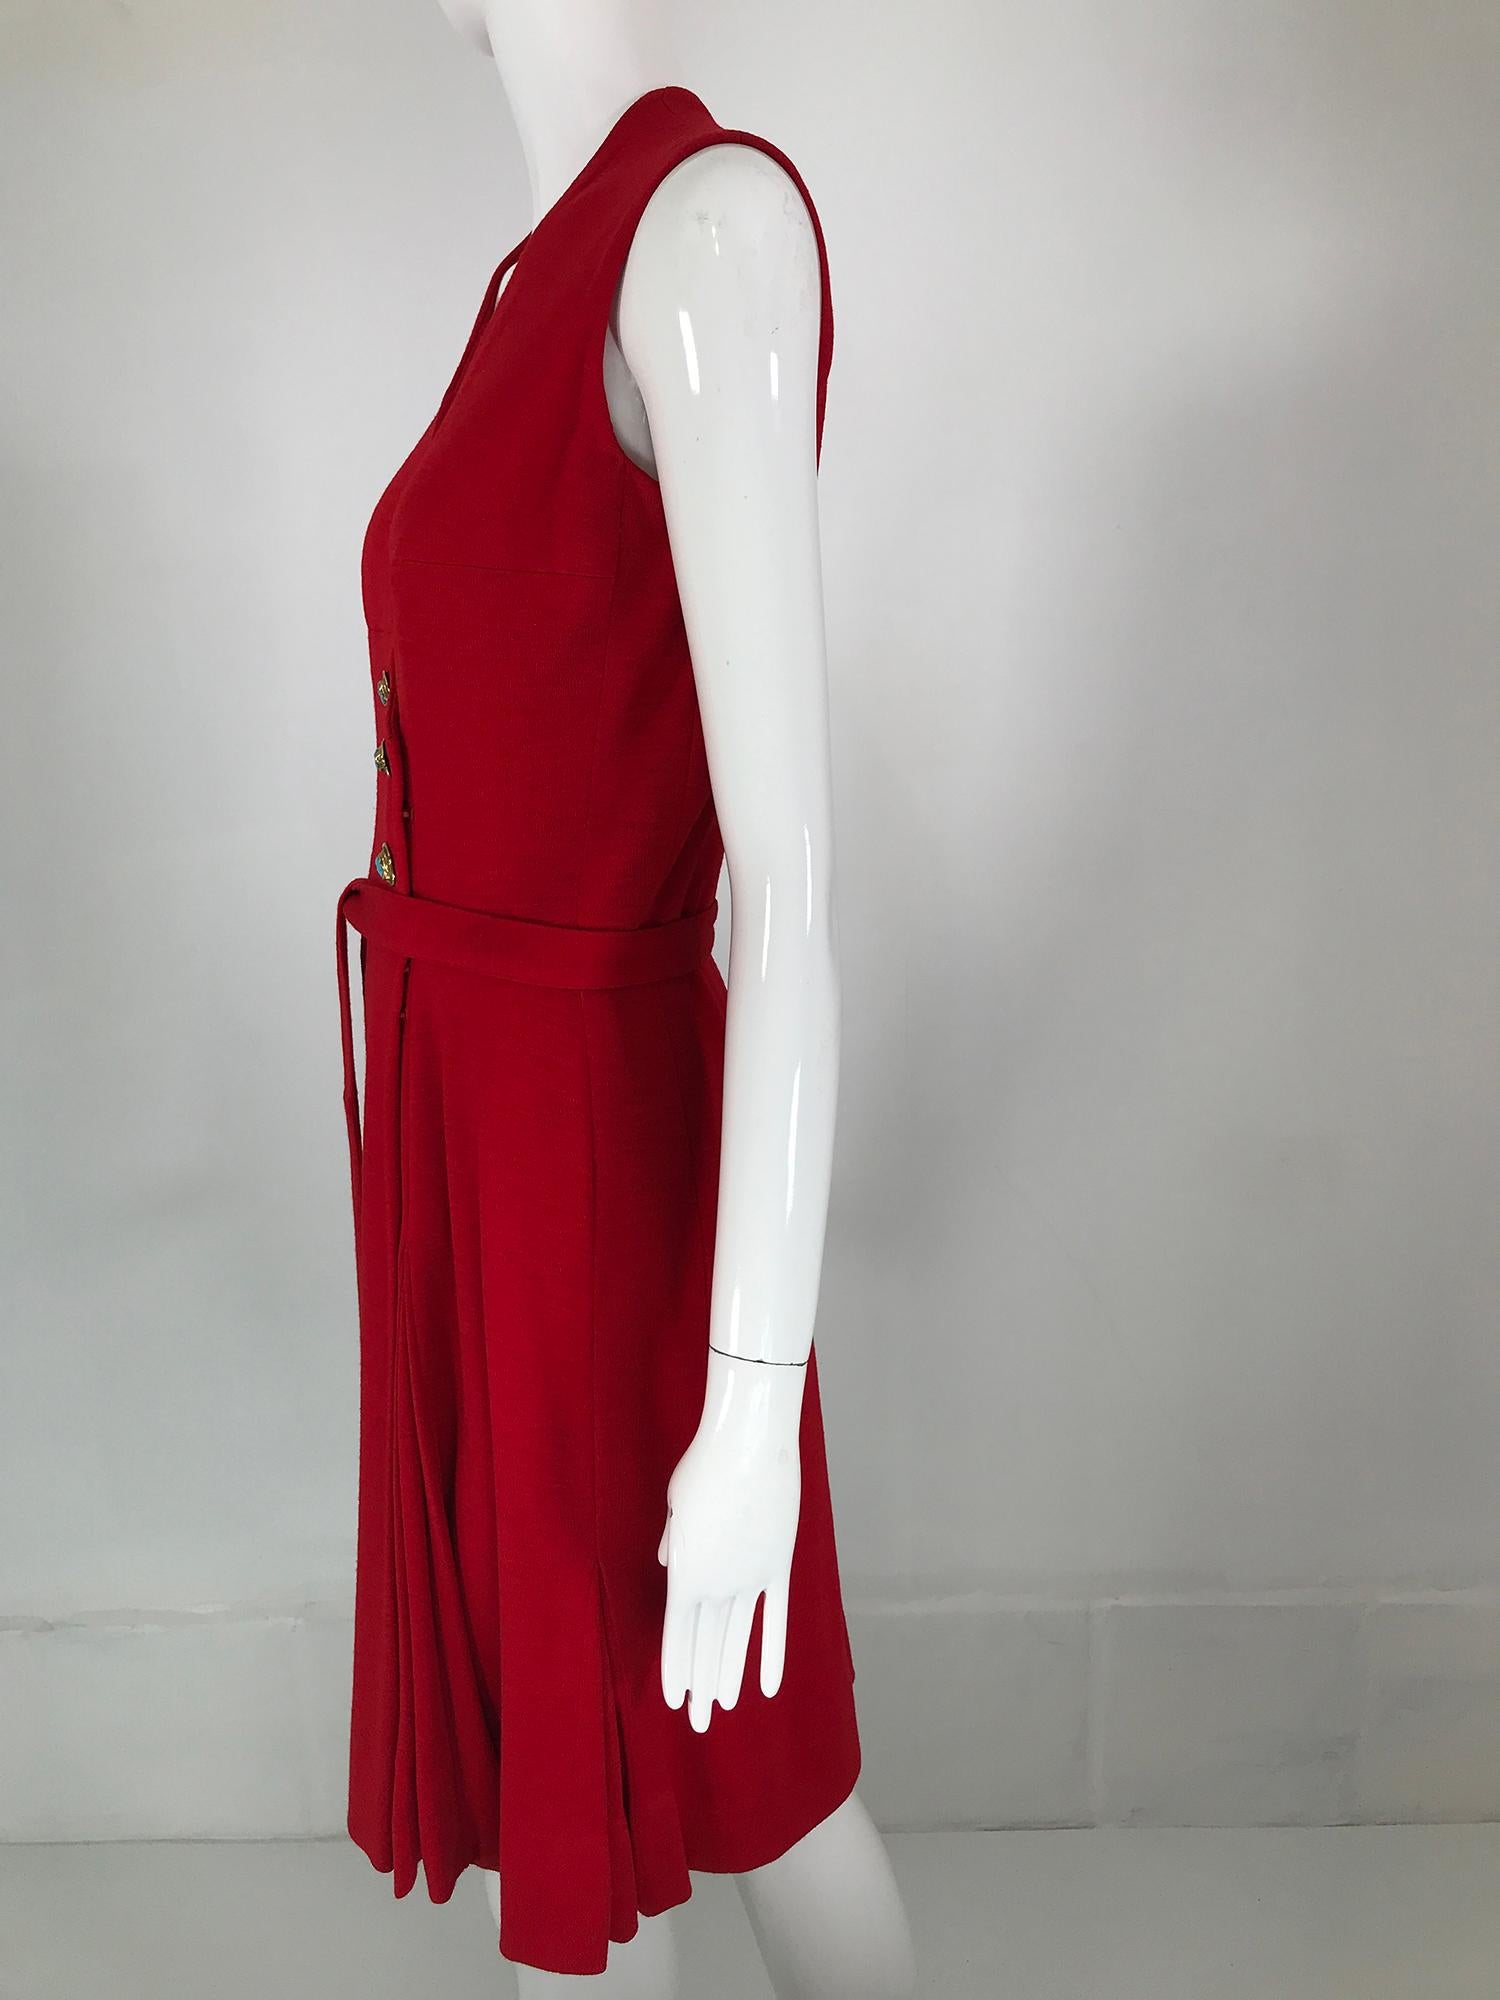 Coco Chanel Red Haute Couture 1950s 2 pc Wool Jersey Jewel Button Dress & Coat  For Sale 8